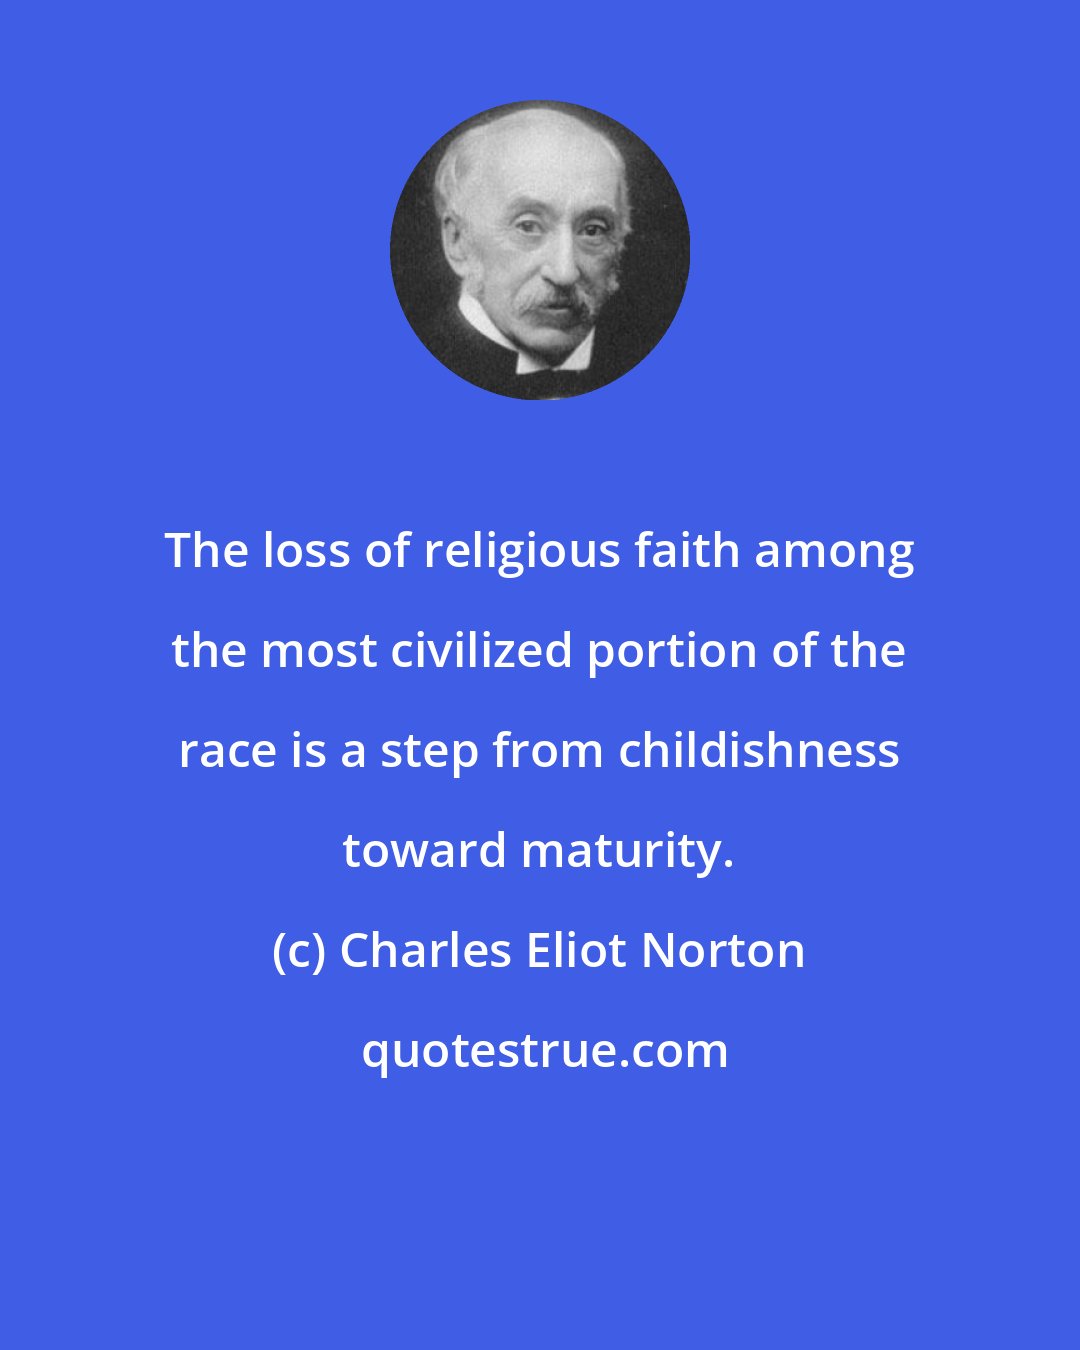 Charles Eliot Norton: The loss of religious faith among the most civilized portion of the race is a step from childishness toward maturity.